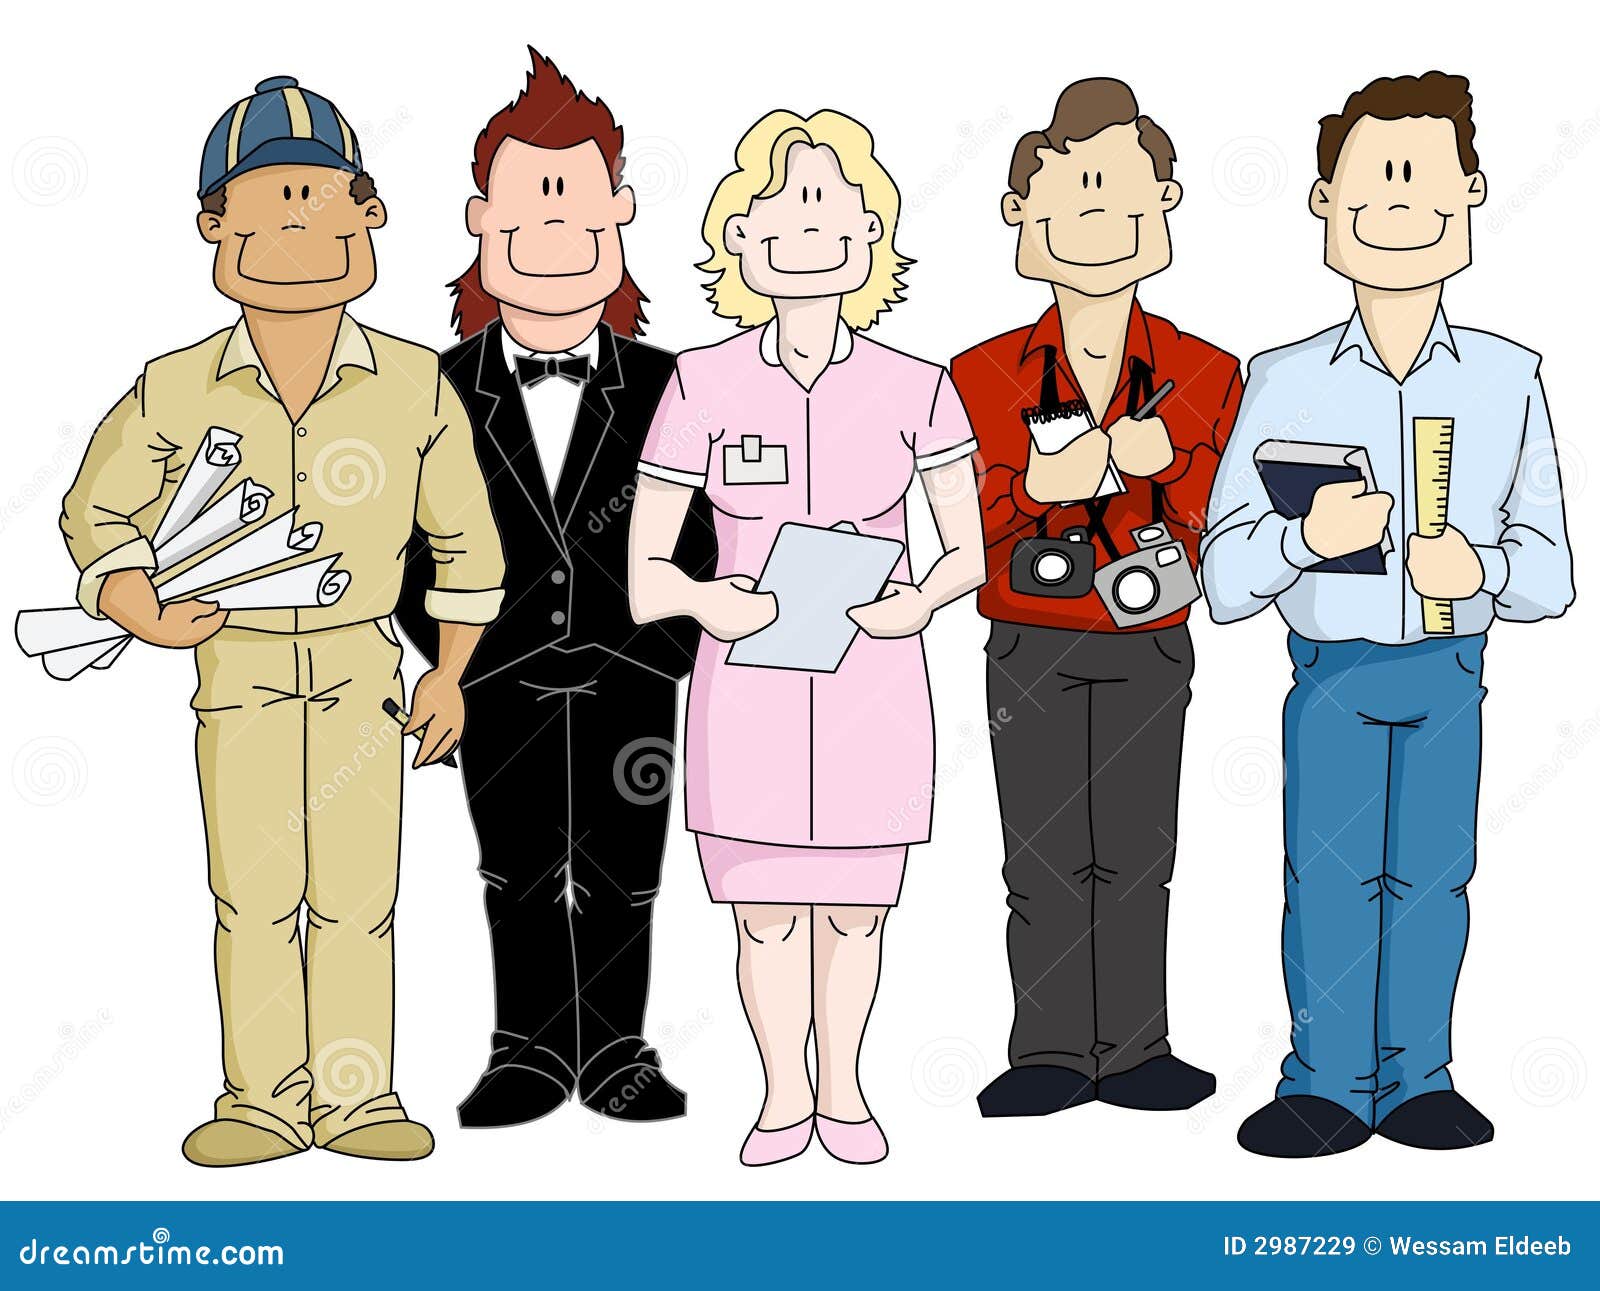 clipart of human resources - photo #15